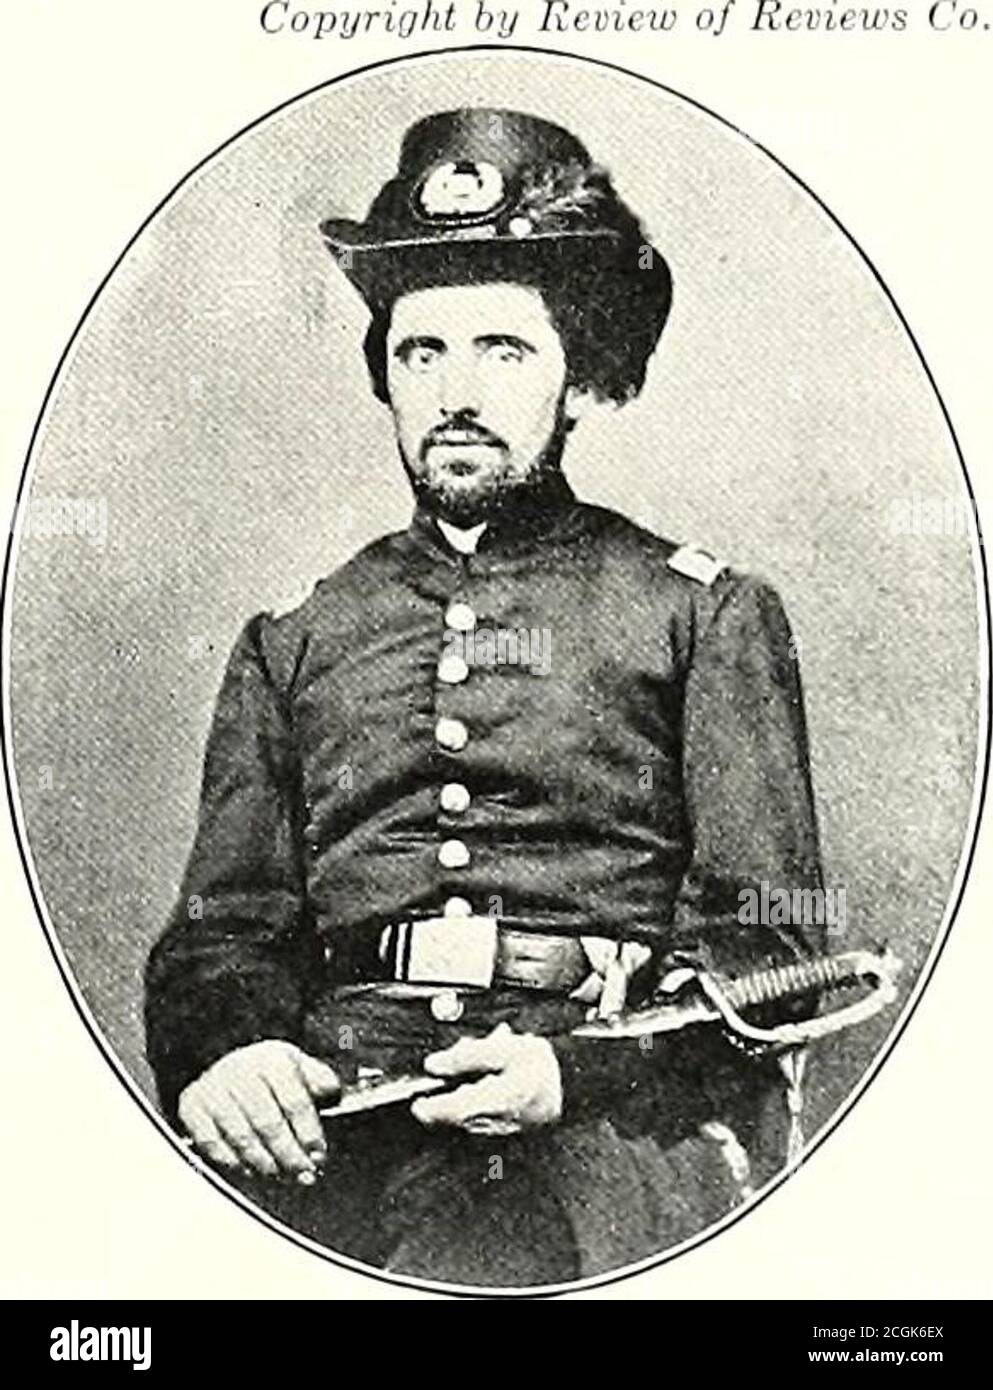 . The photographic history of the Civil War : in ten volumes . CAITAIN JOHN A. RAWLINS force and occupied Paducah, Kentucky,before the Confederates, approach-ing with the same purpose, could arrive.Grant was impatient to drive back theConfederate lines in Kentucky andTennessee and began early to importimeWashington to be allowed to carry outmaneuvers. His keen judgment con-vinced him that these must quickly bemade in order to secure the advantagehi this outlying arena of the war.Captain Rawlins was made Assistant.Adjutant-General by Grant, and liftedfrom his shoulders much of the routineof the Stock Photo